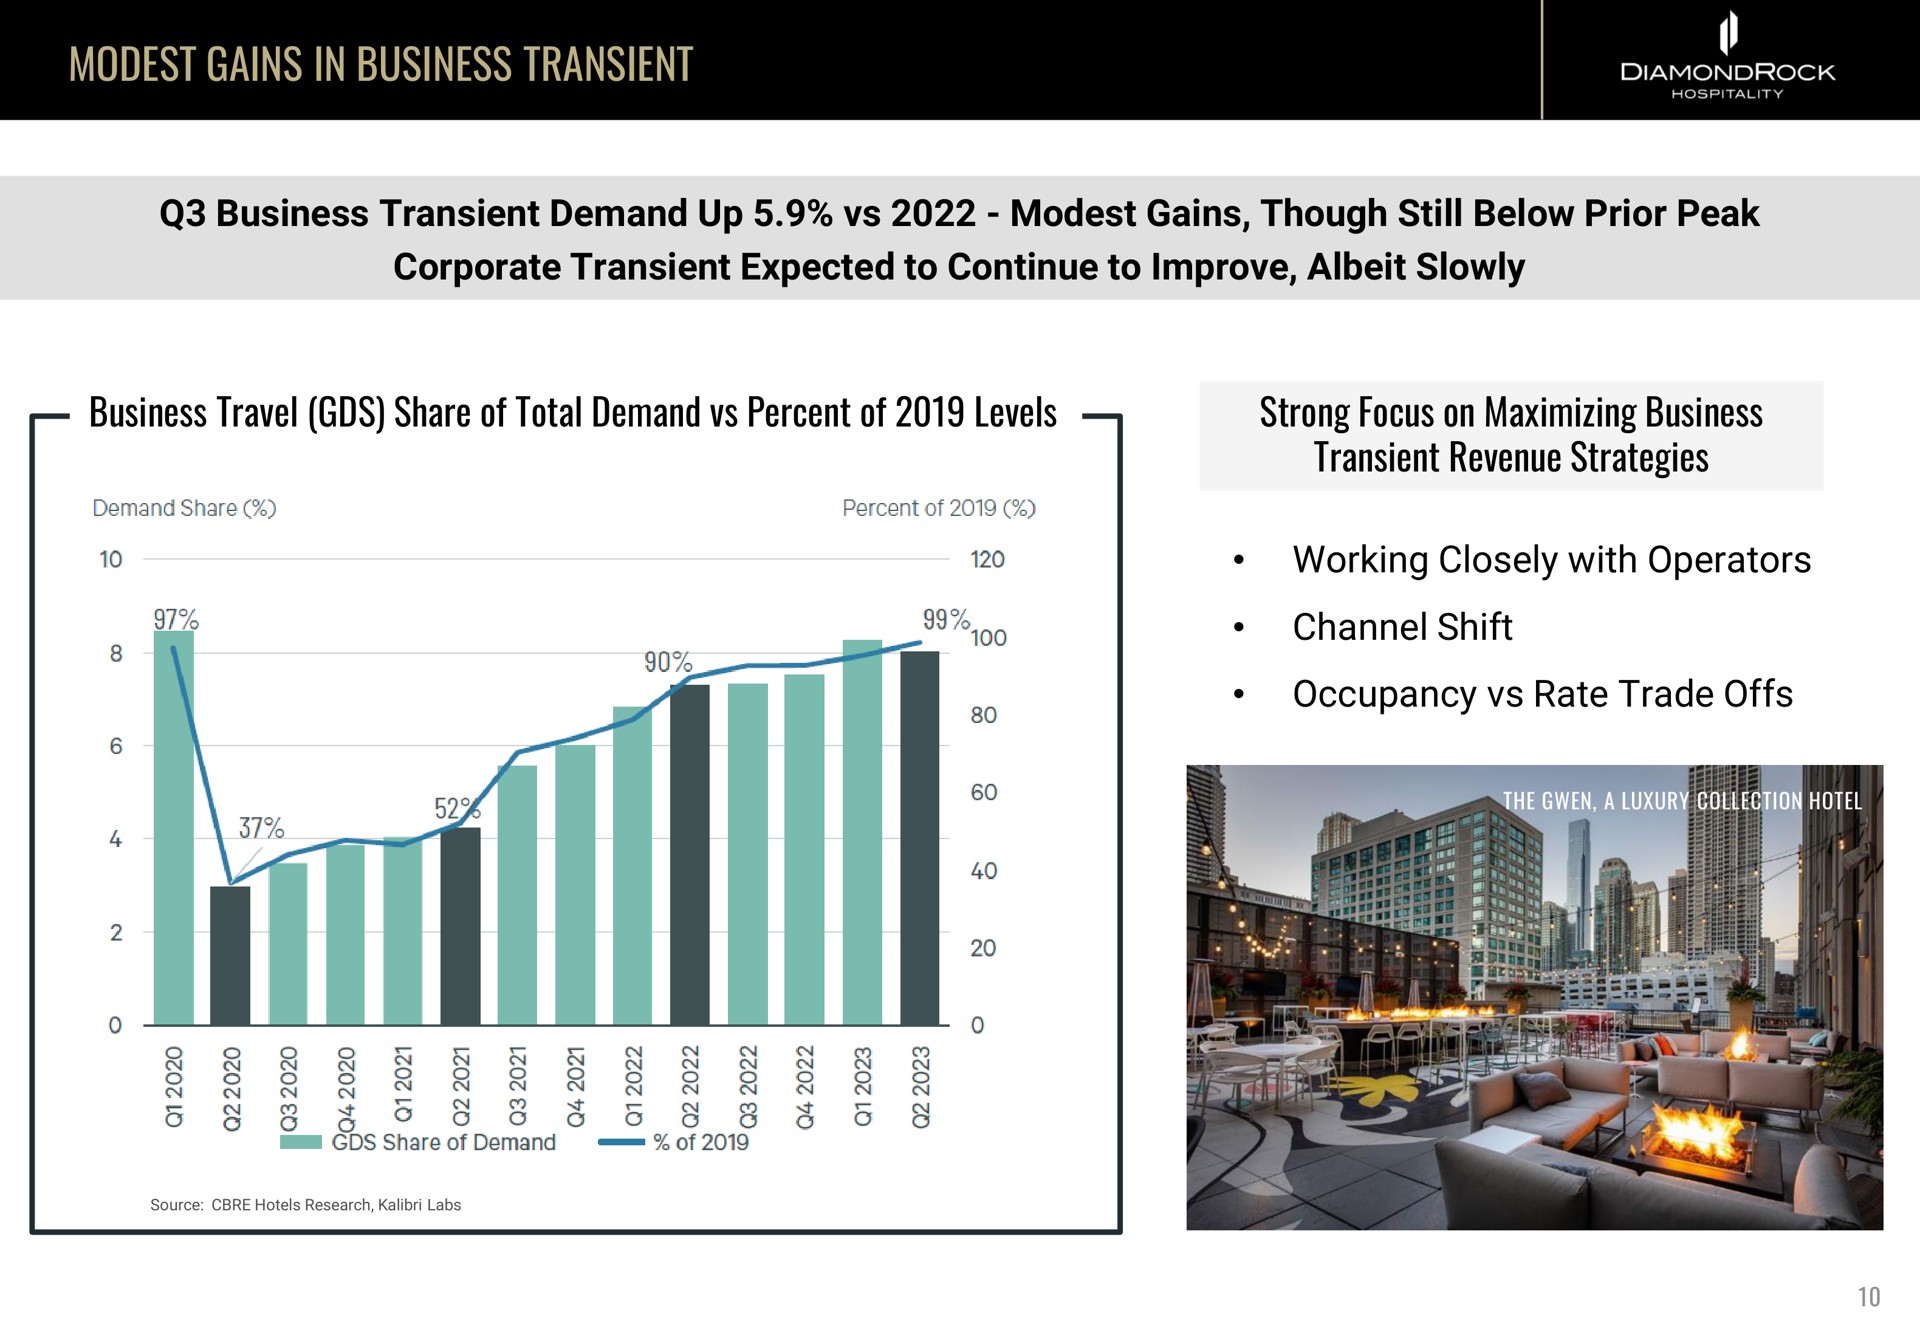 modest gains in business transient business transient demand up modest gains though still below prior peak corporate transient expected to continue to improve albeit slowly business travel share of total demand percent of levels strong focus on maximizing business transient revenue strategies working closely with operators channel shift occupancy rate trade offs my res ess | DiamondRock Hospitality